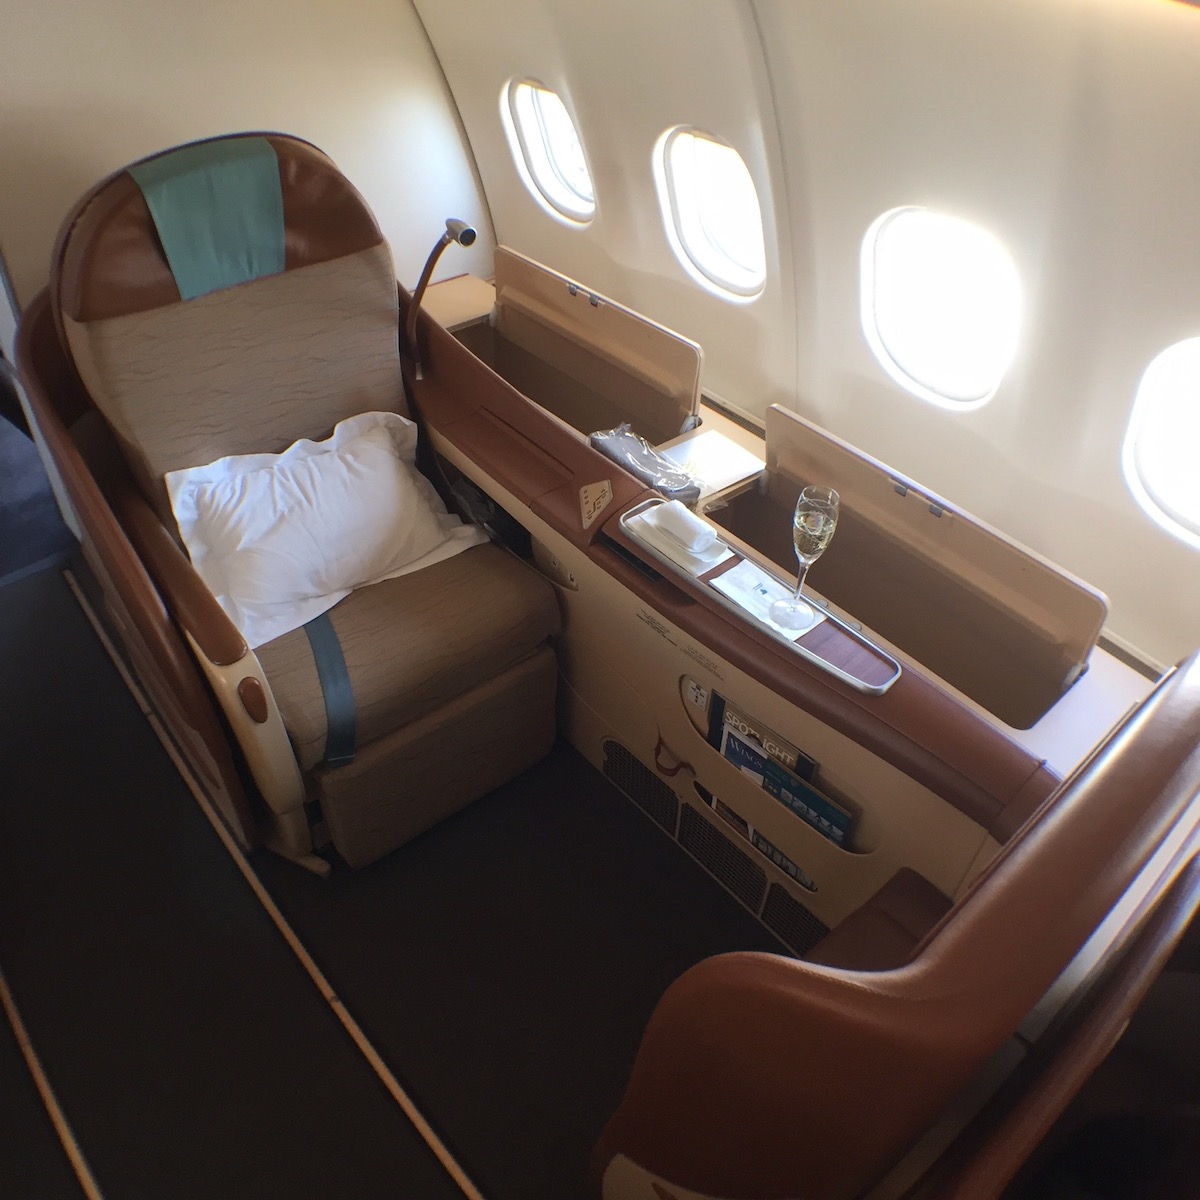 The World's 10 Best Business Class Seats (2021) | One Mile at a Time